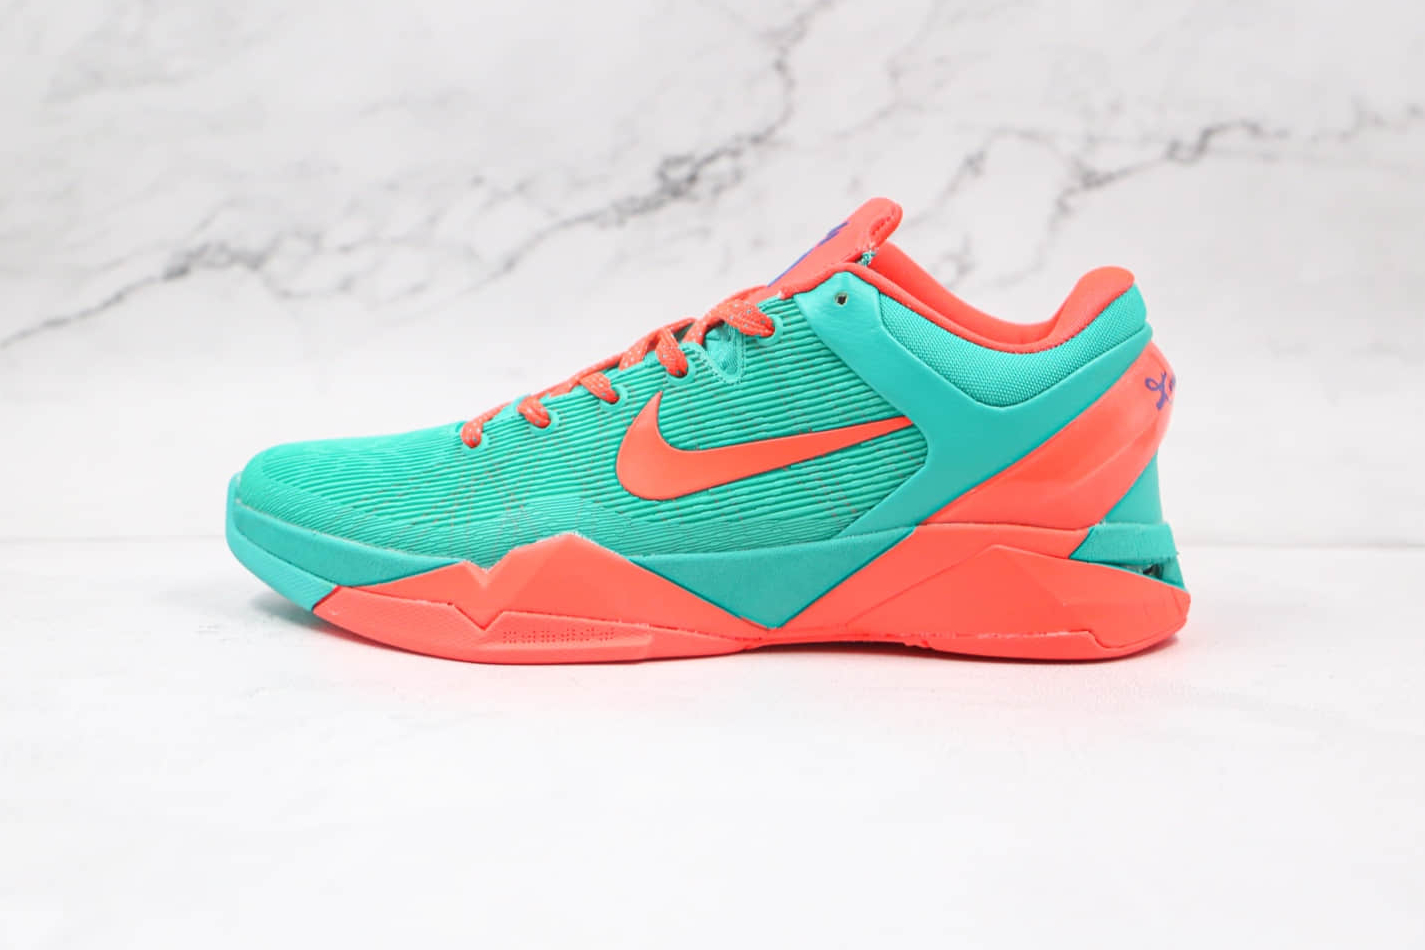 Nike Zoom Kobe 7 System 'Barcelona Home' 488371-301 - Premium Basketball Sneakers at Competitive Prices